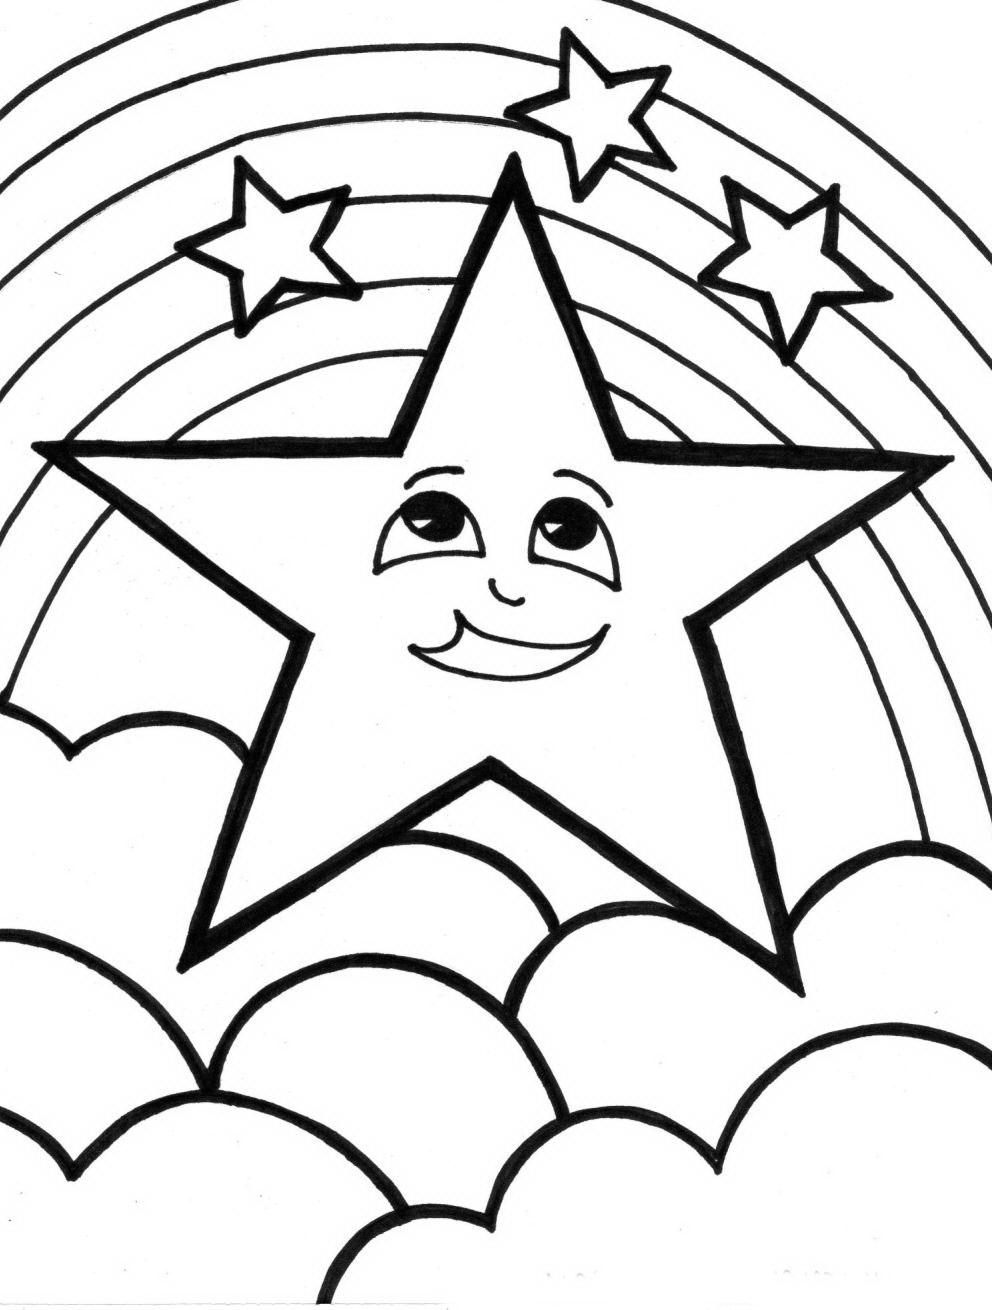 Rainbow Coloring Pages for childrens printable for free